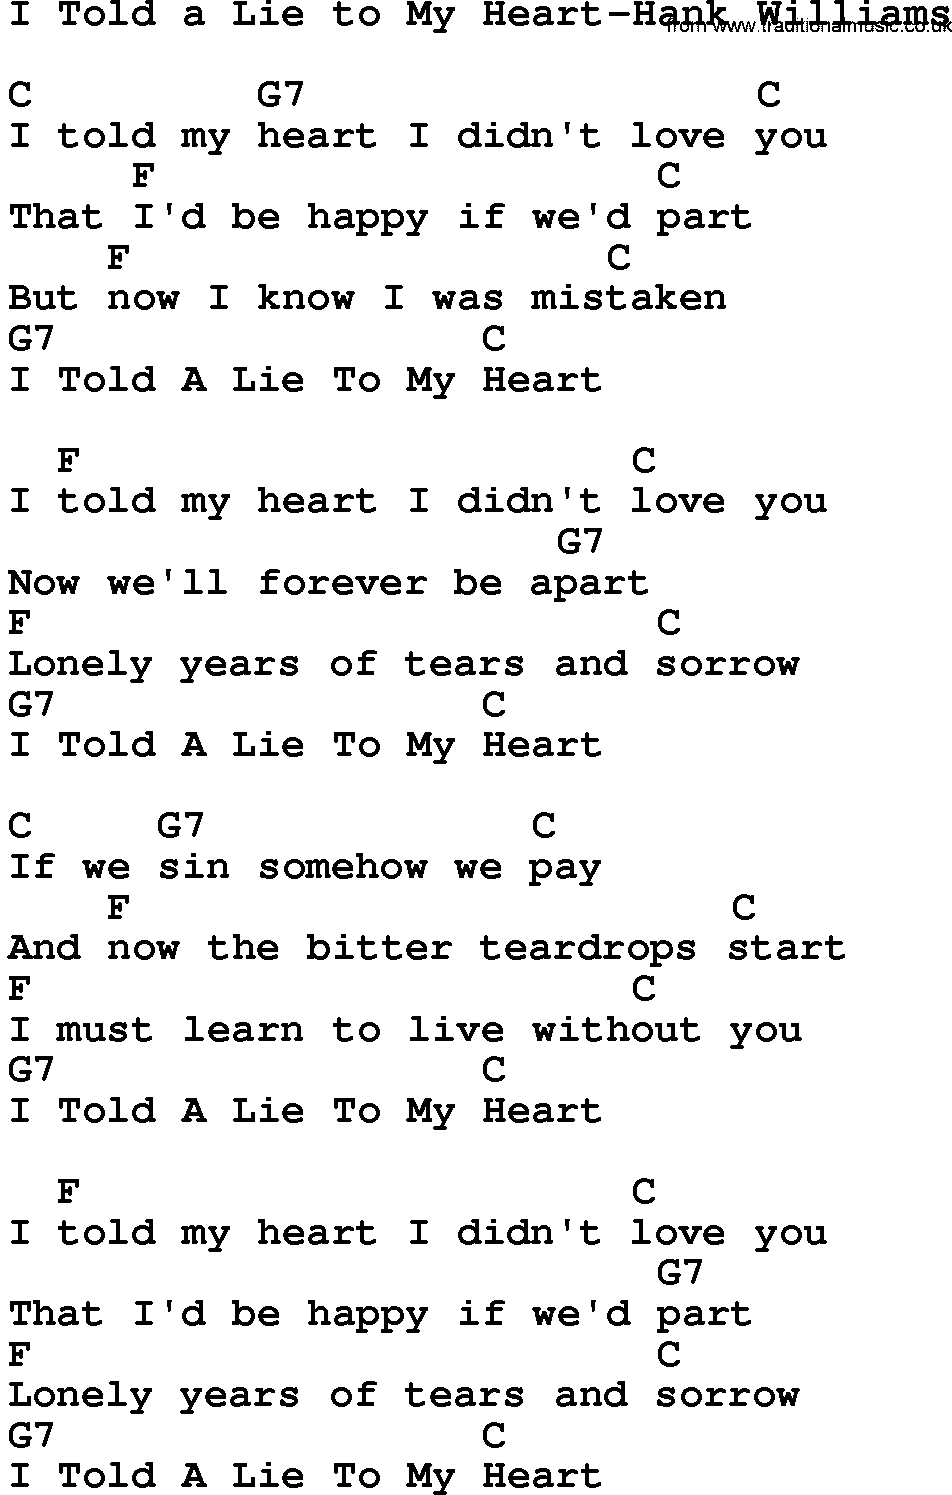 Country music song: I Told A Lie To My Heart-Hank Williams lyrics and chords